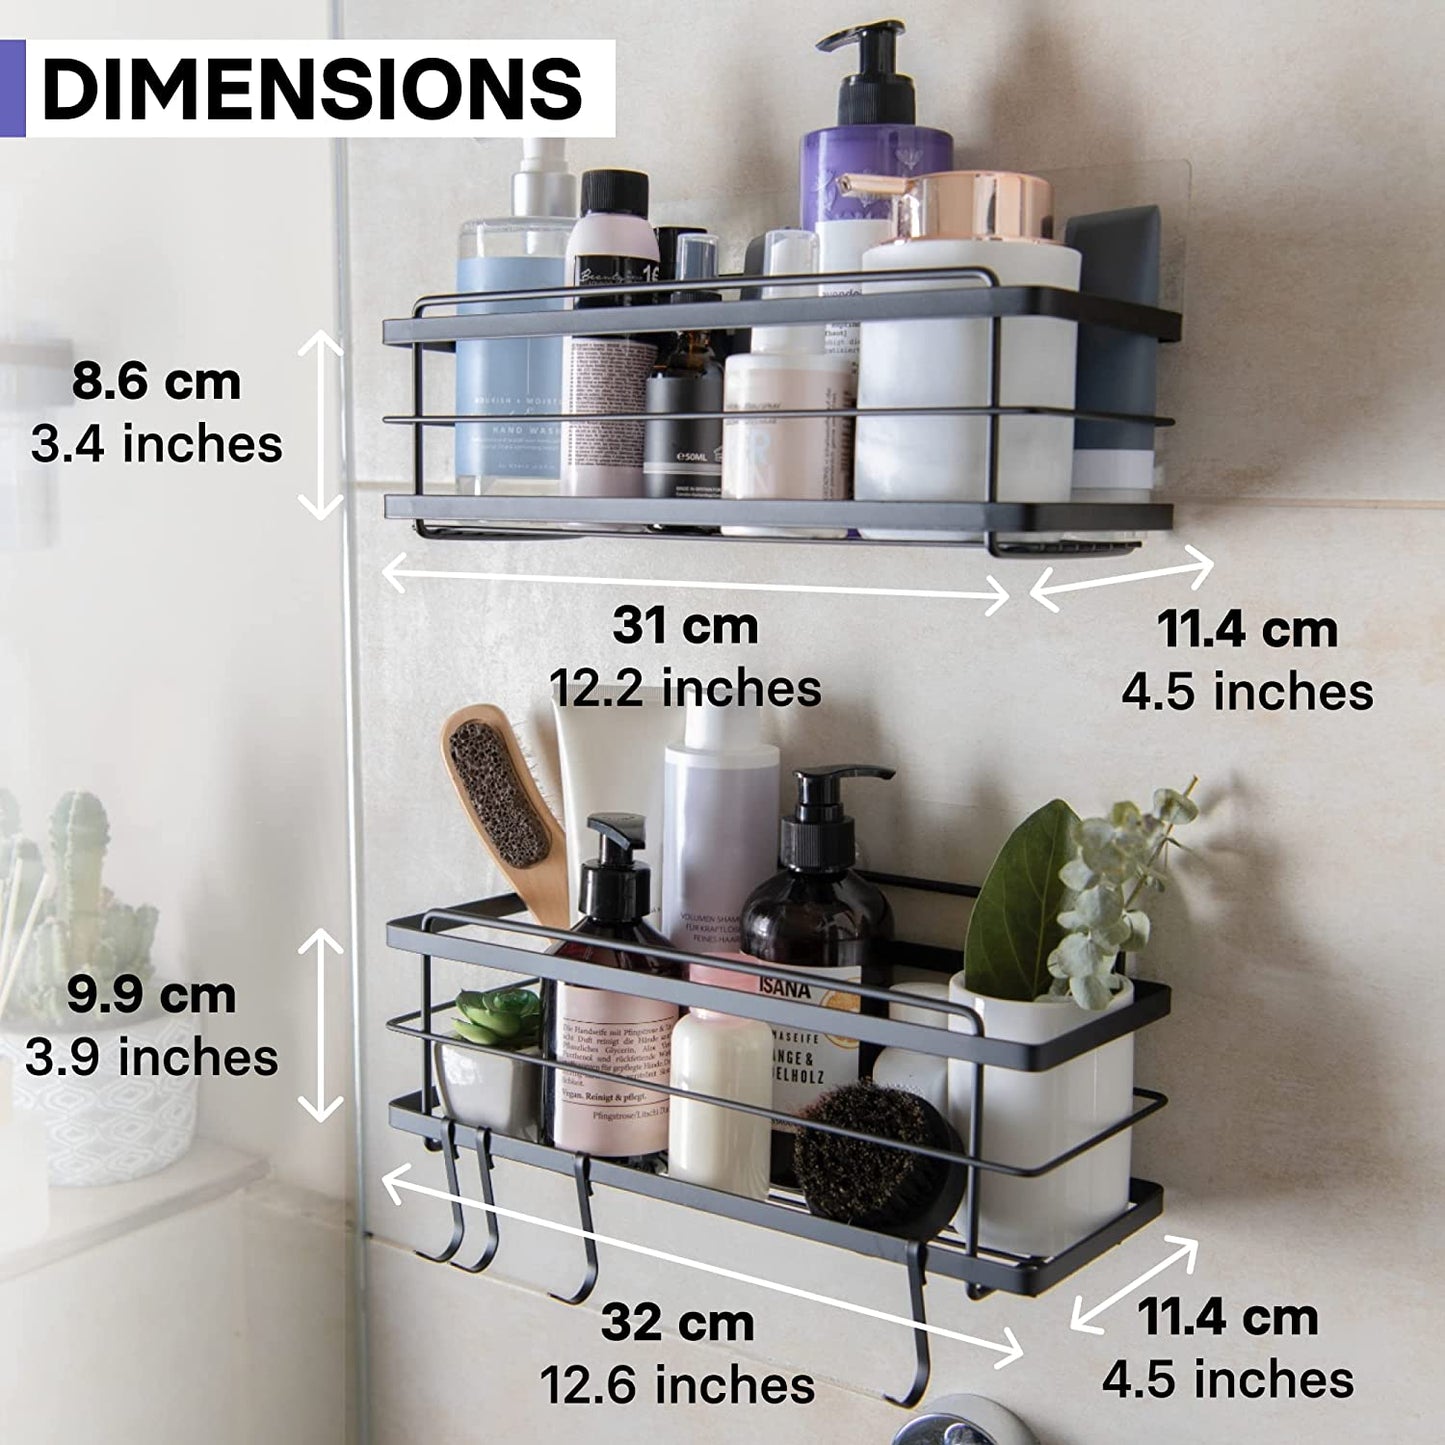 Shower Caddy Basket Shelf Pack of 2 - Adhesive Drill-Free Home Kitchen or Bathroom Organiser - Black Shower Storage Shelves - Bath Tray W/ Hooks for Accessories